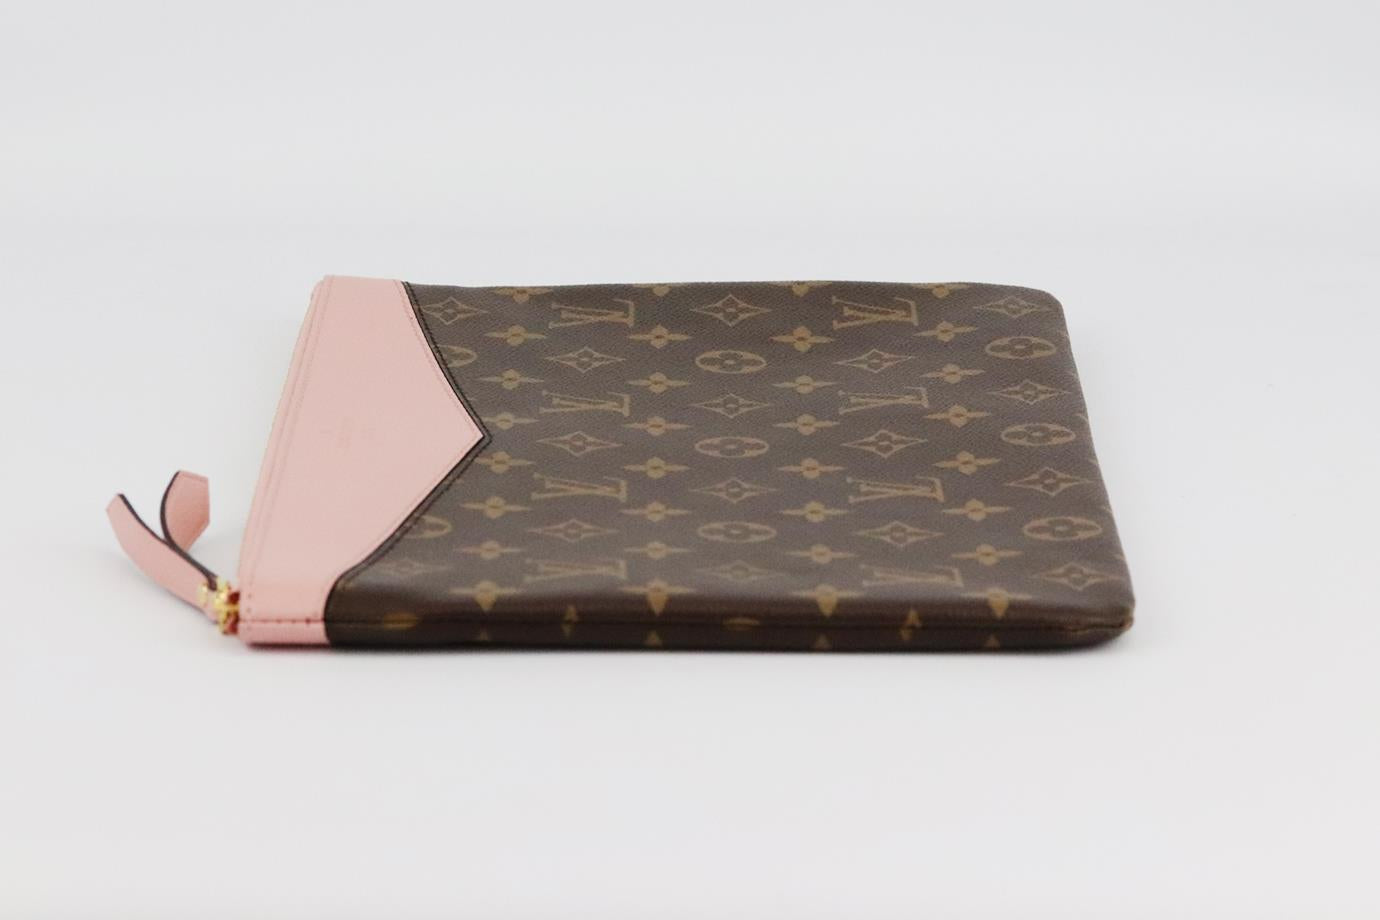 LOUIS VUITTON DAILY POUCH MONOGRAMMED COATED CANVAS AND LEATHER CLUTCH